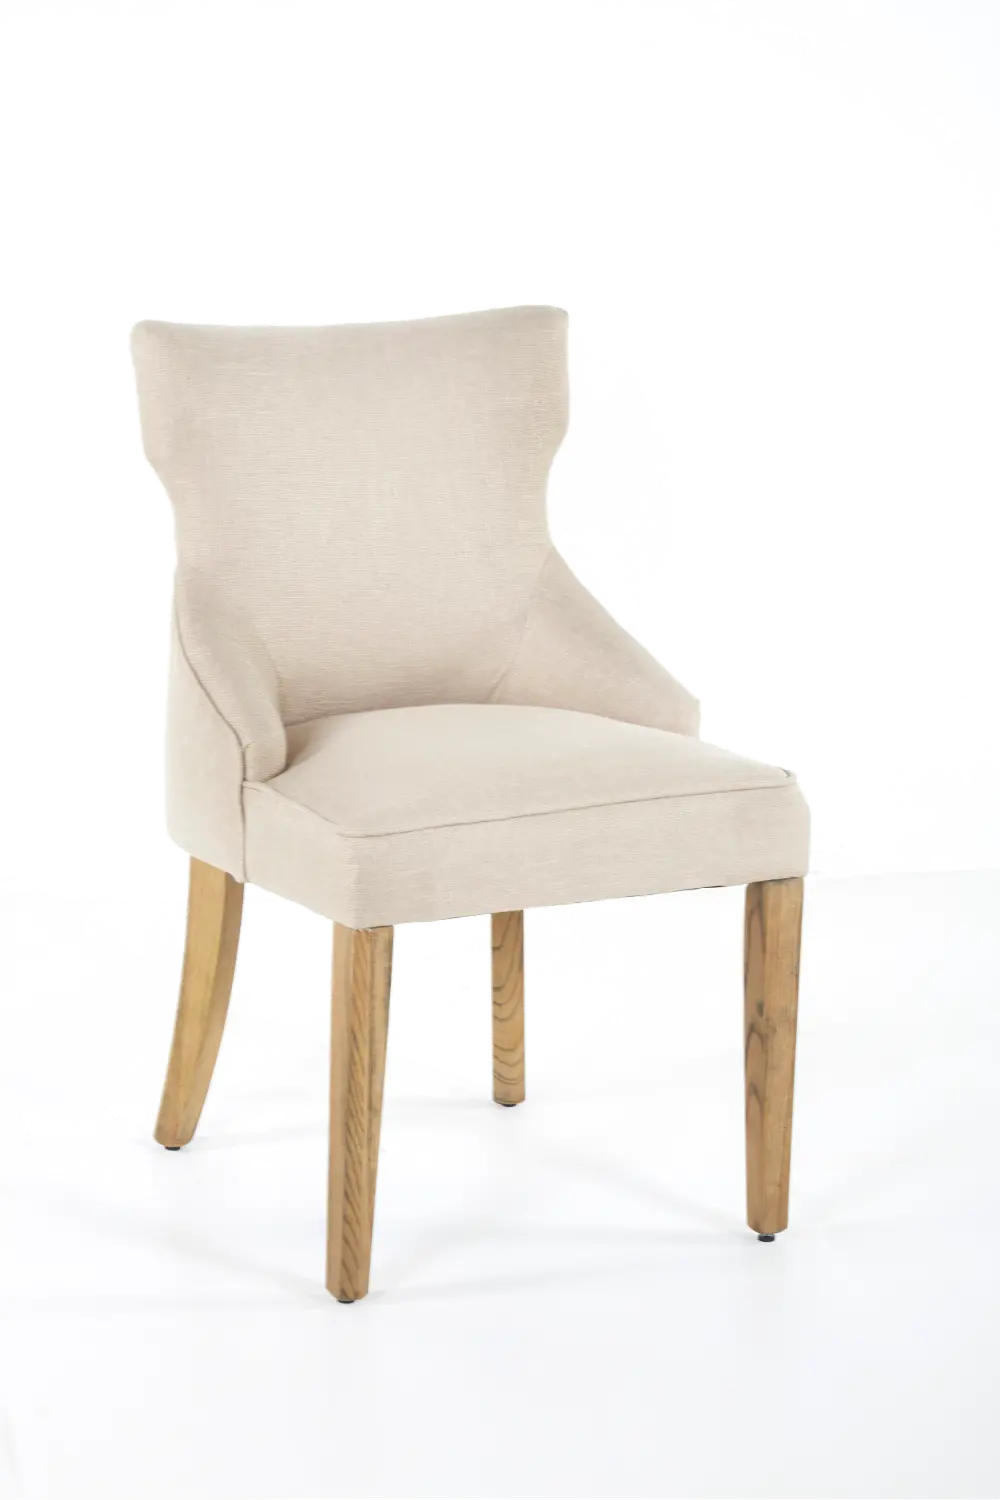 Tan and Natural Upholstered Dining Room Chair - Modern Eclectic-1